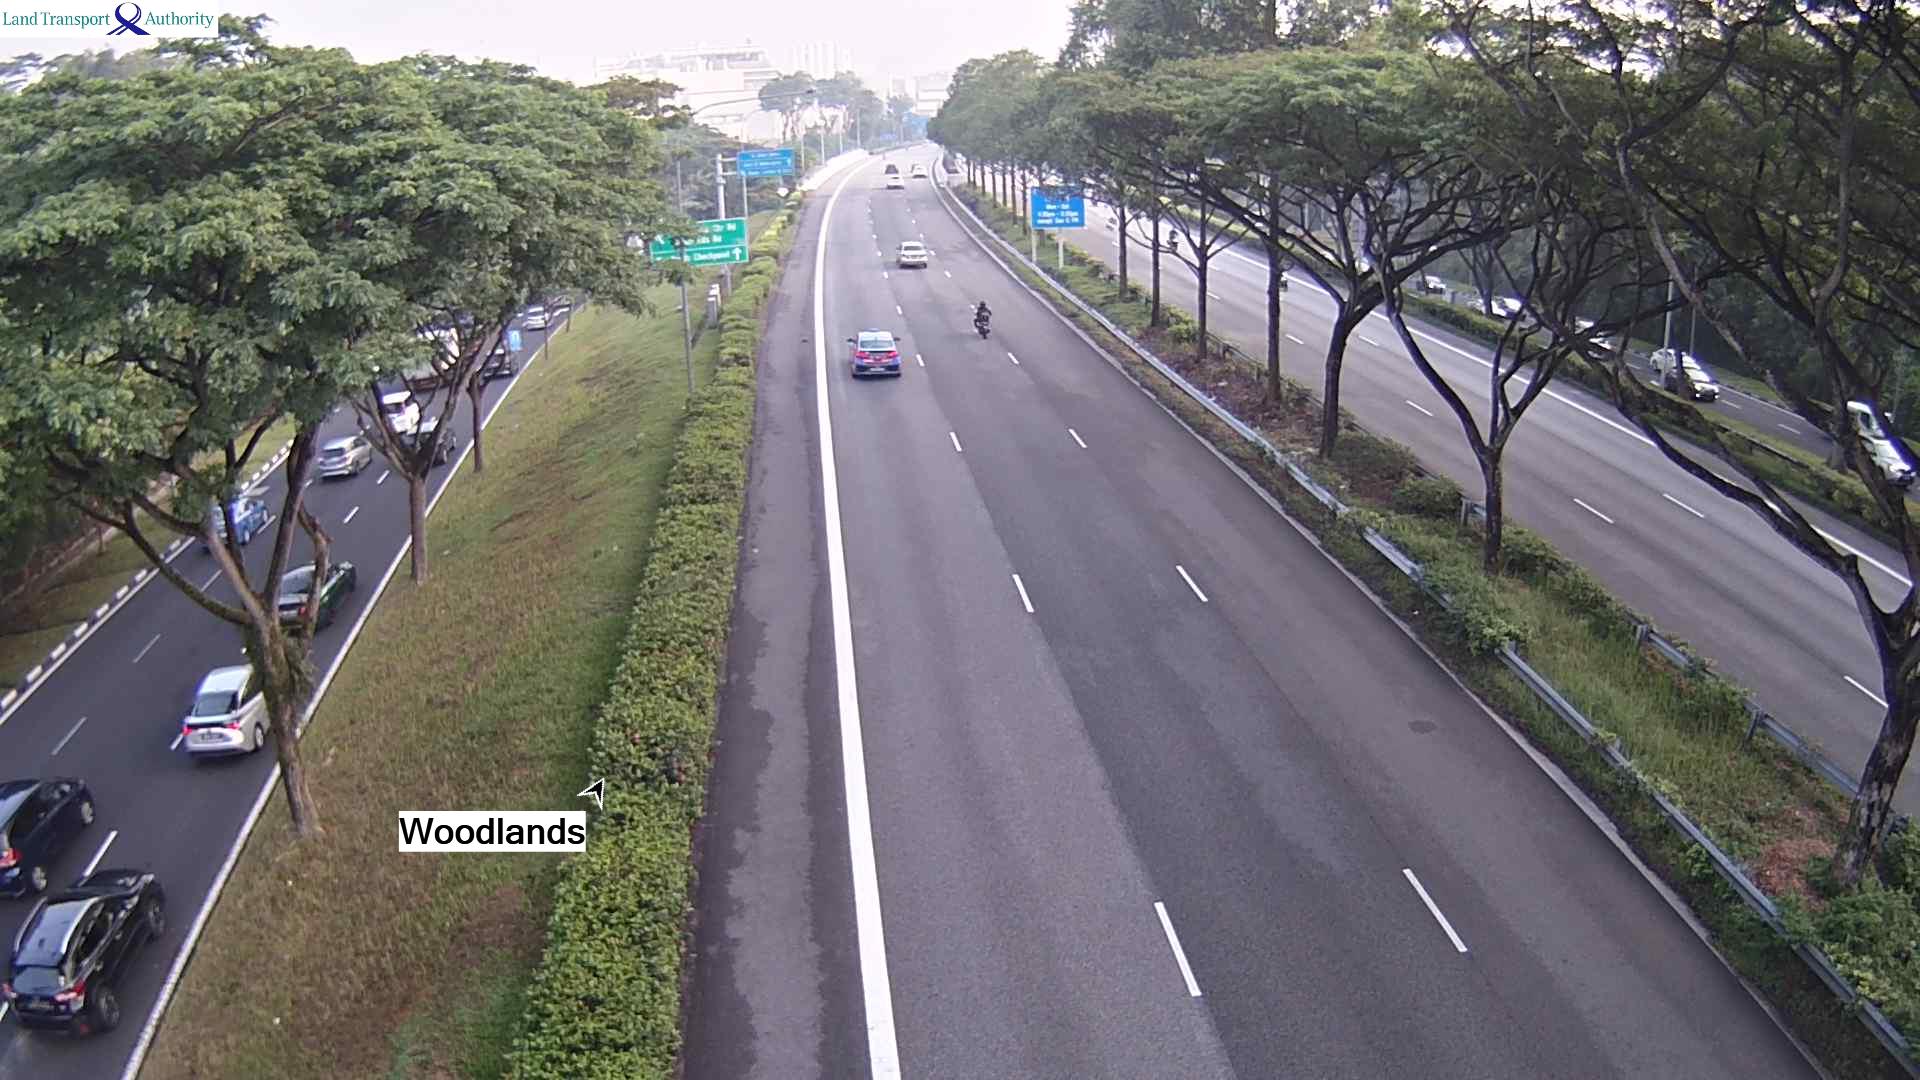 View from Woodlands Flyover (Towards Checkpoint) - Bukit Timah Expressway (BKE) - Singapore